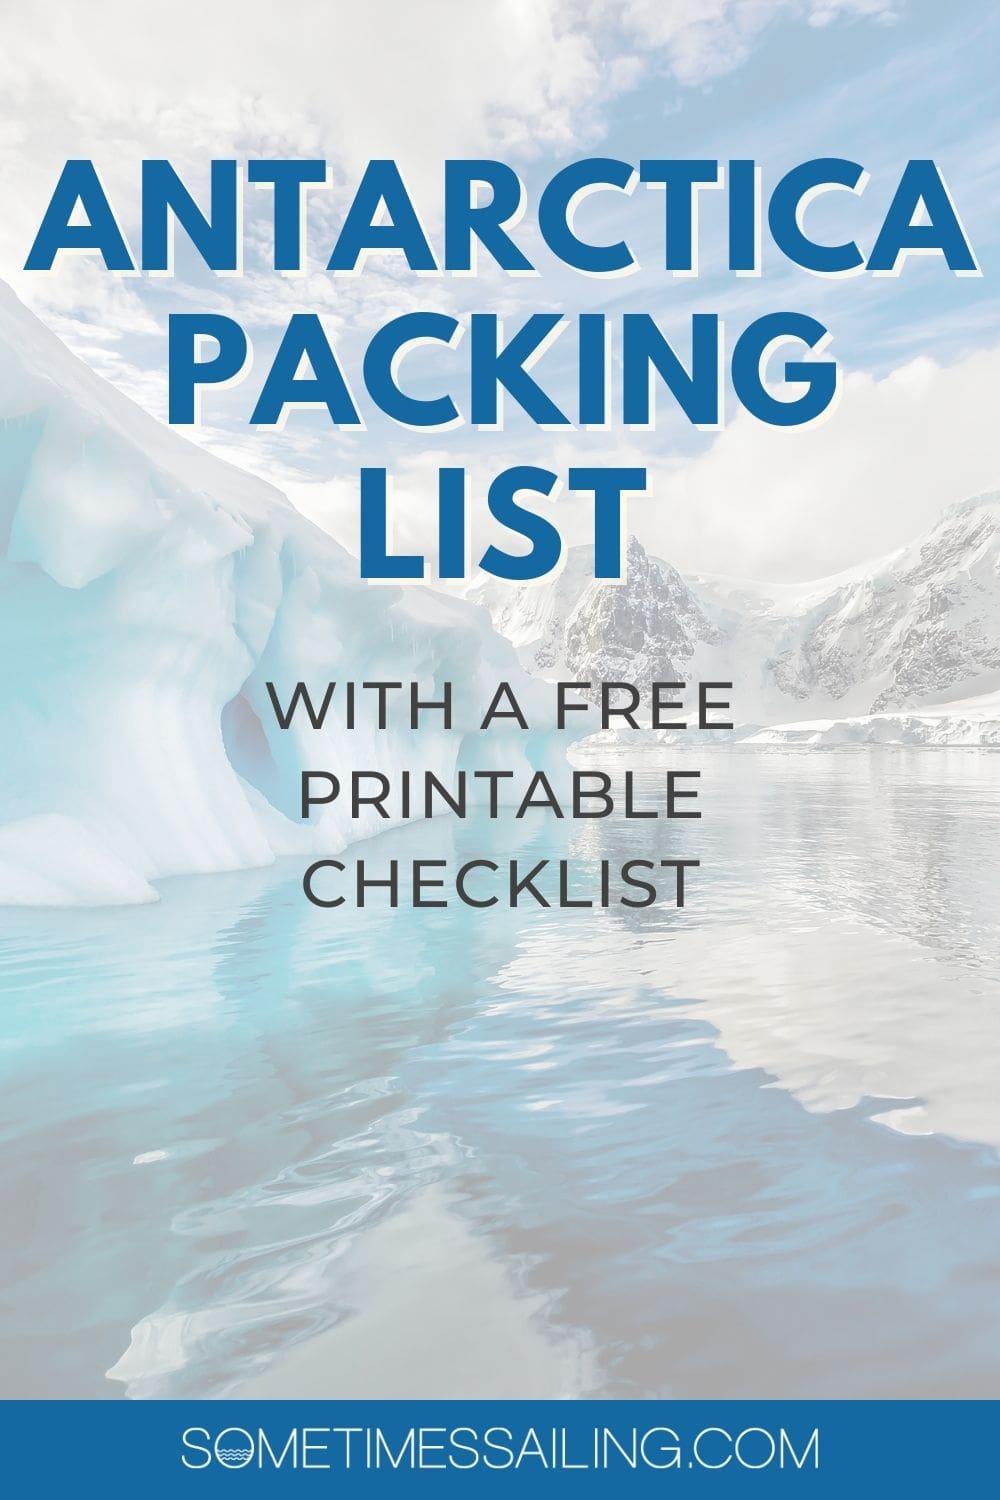 Antarctica Packing List with a free printable checklist on top of a faded photo of icebergs and water.